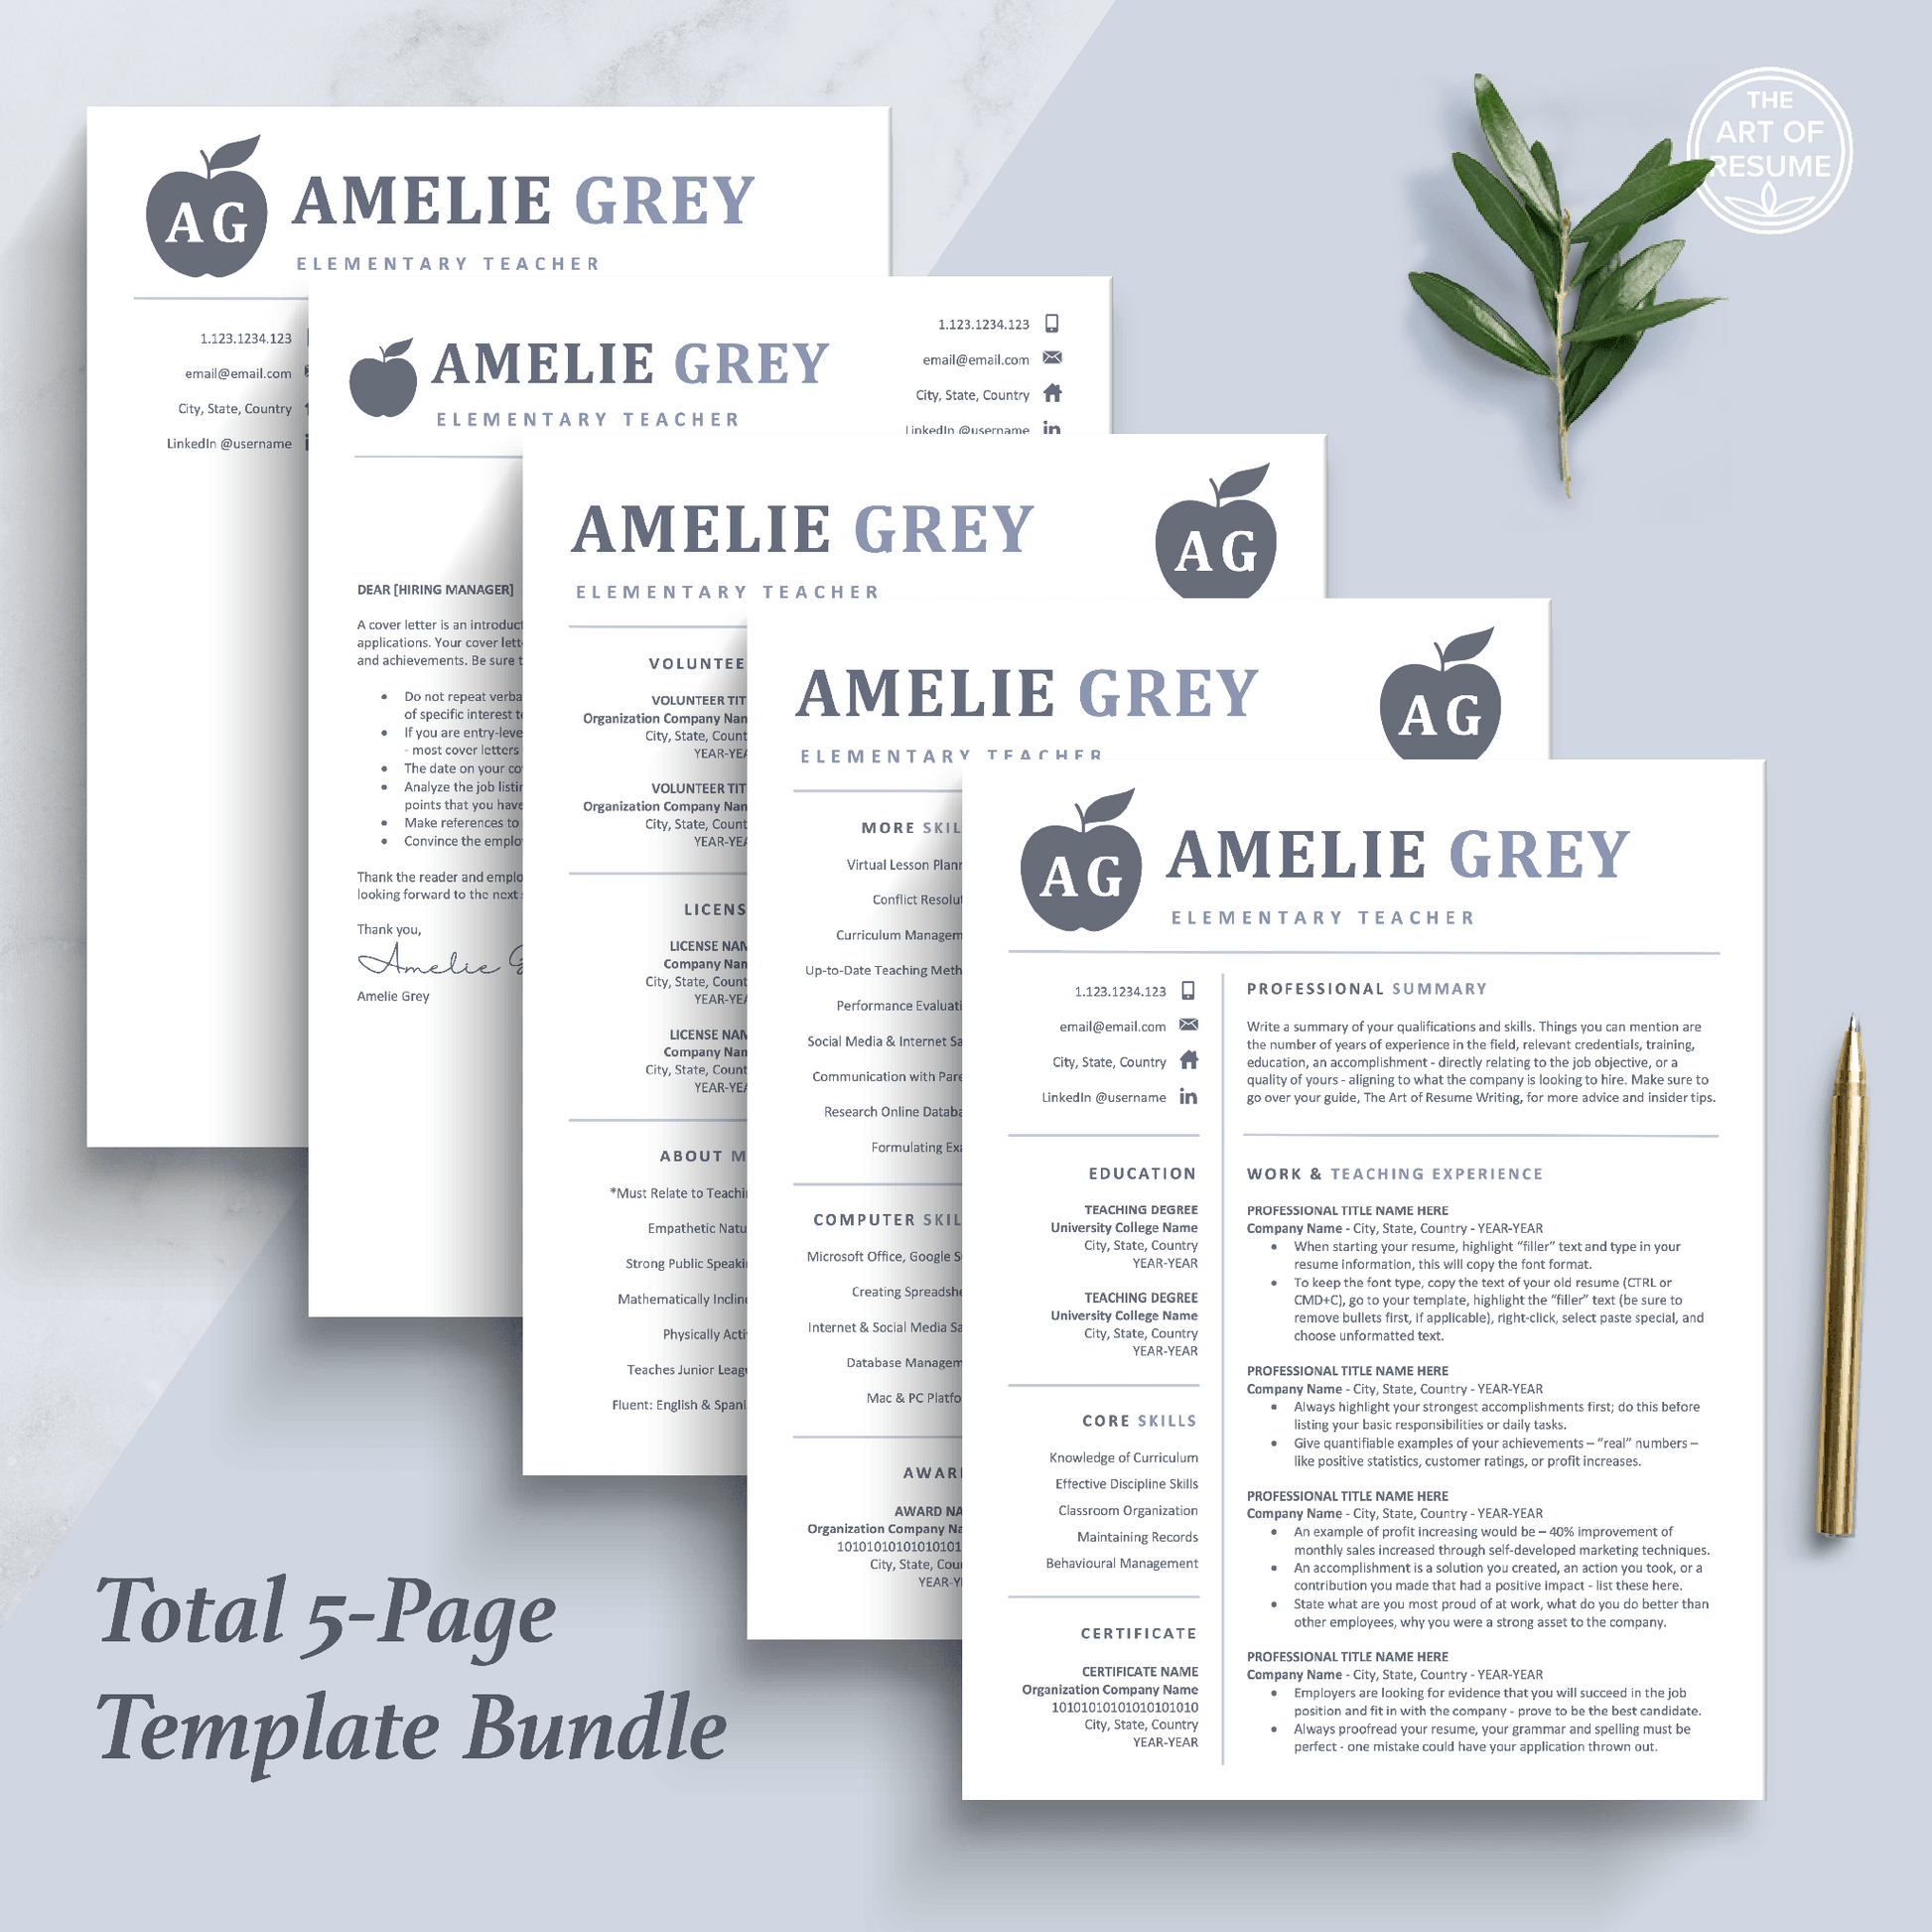 The Art of Resume Templates |  Creative Teacher Blue Grey Resume CV Design Bundle including matching cover letter and reference page